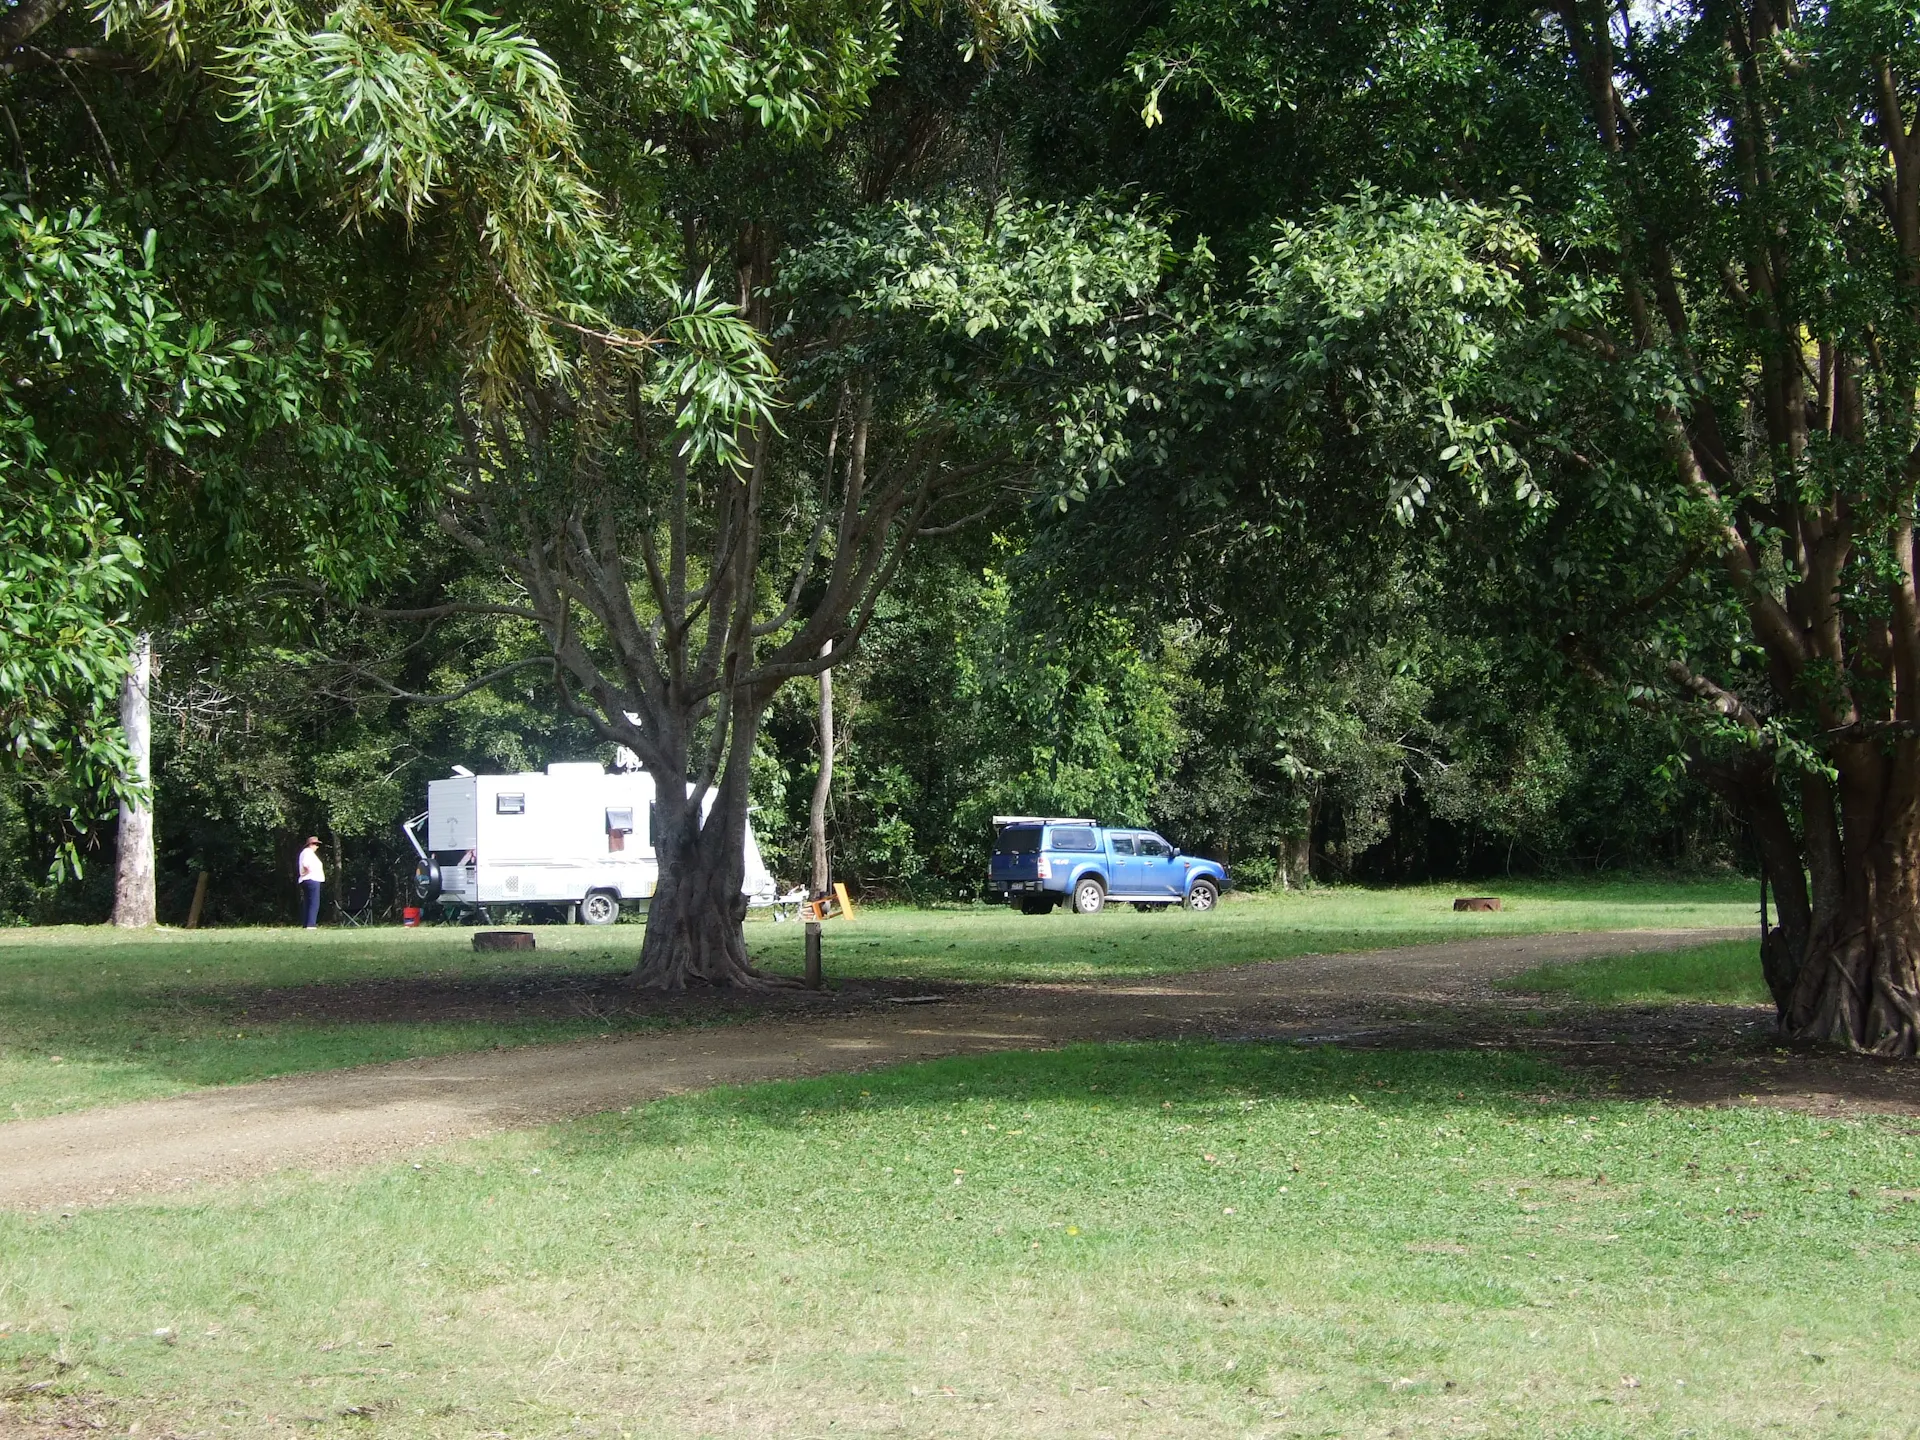 Caravan set on open grassy space in shade of tall trees.